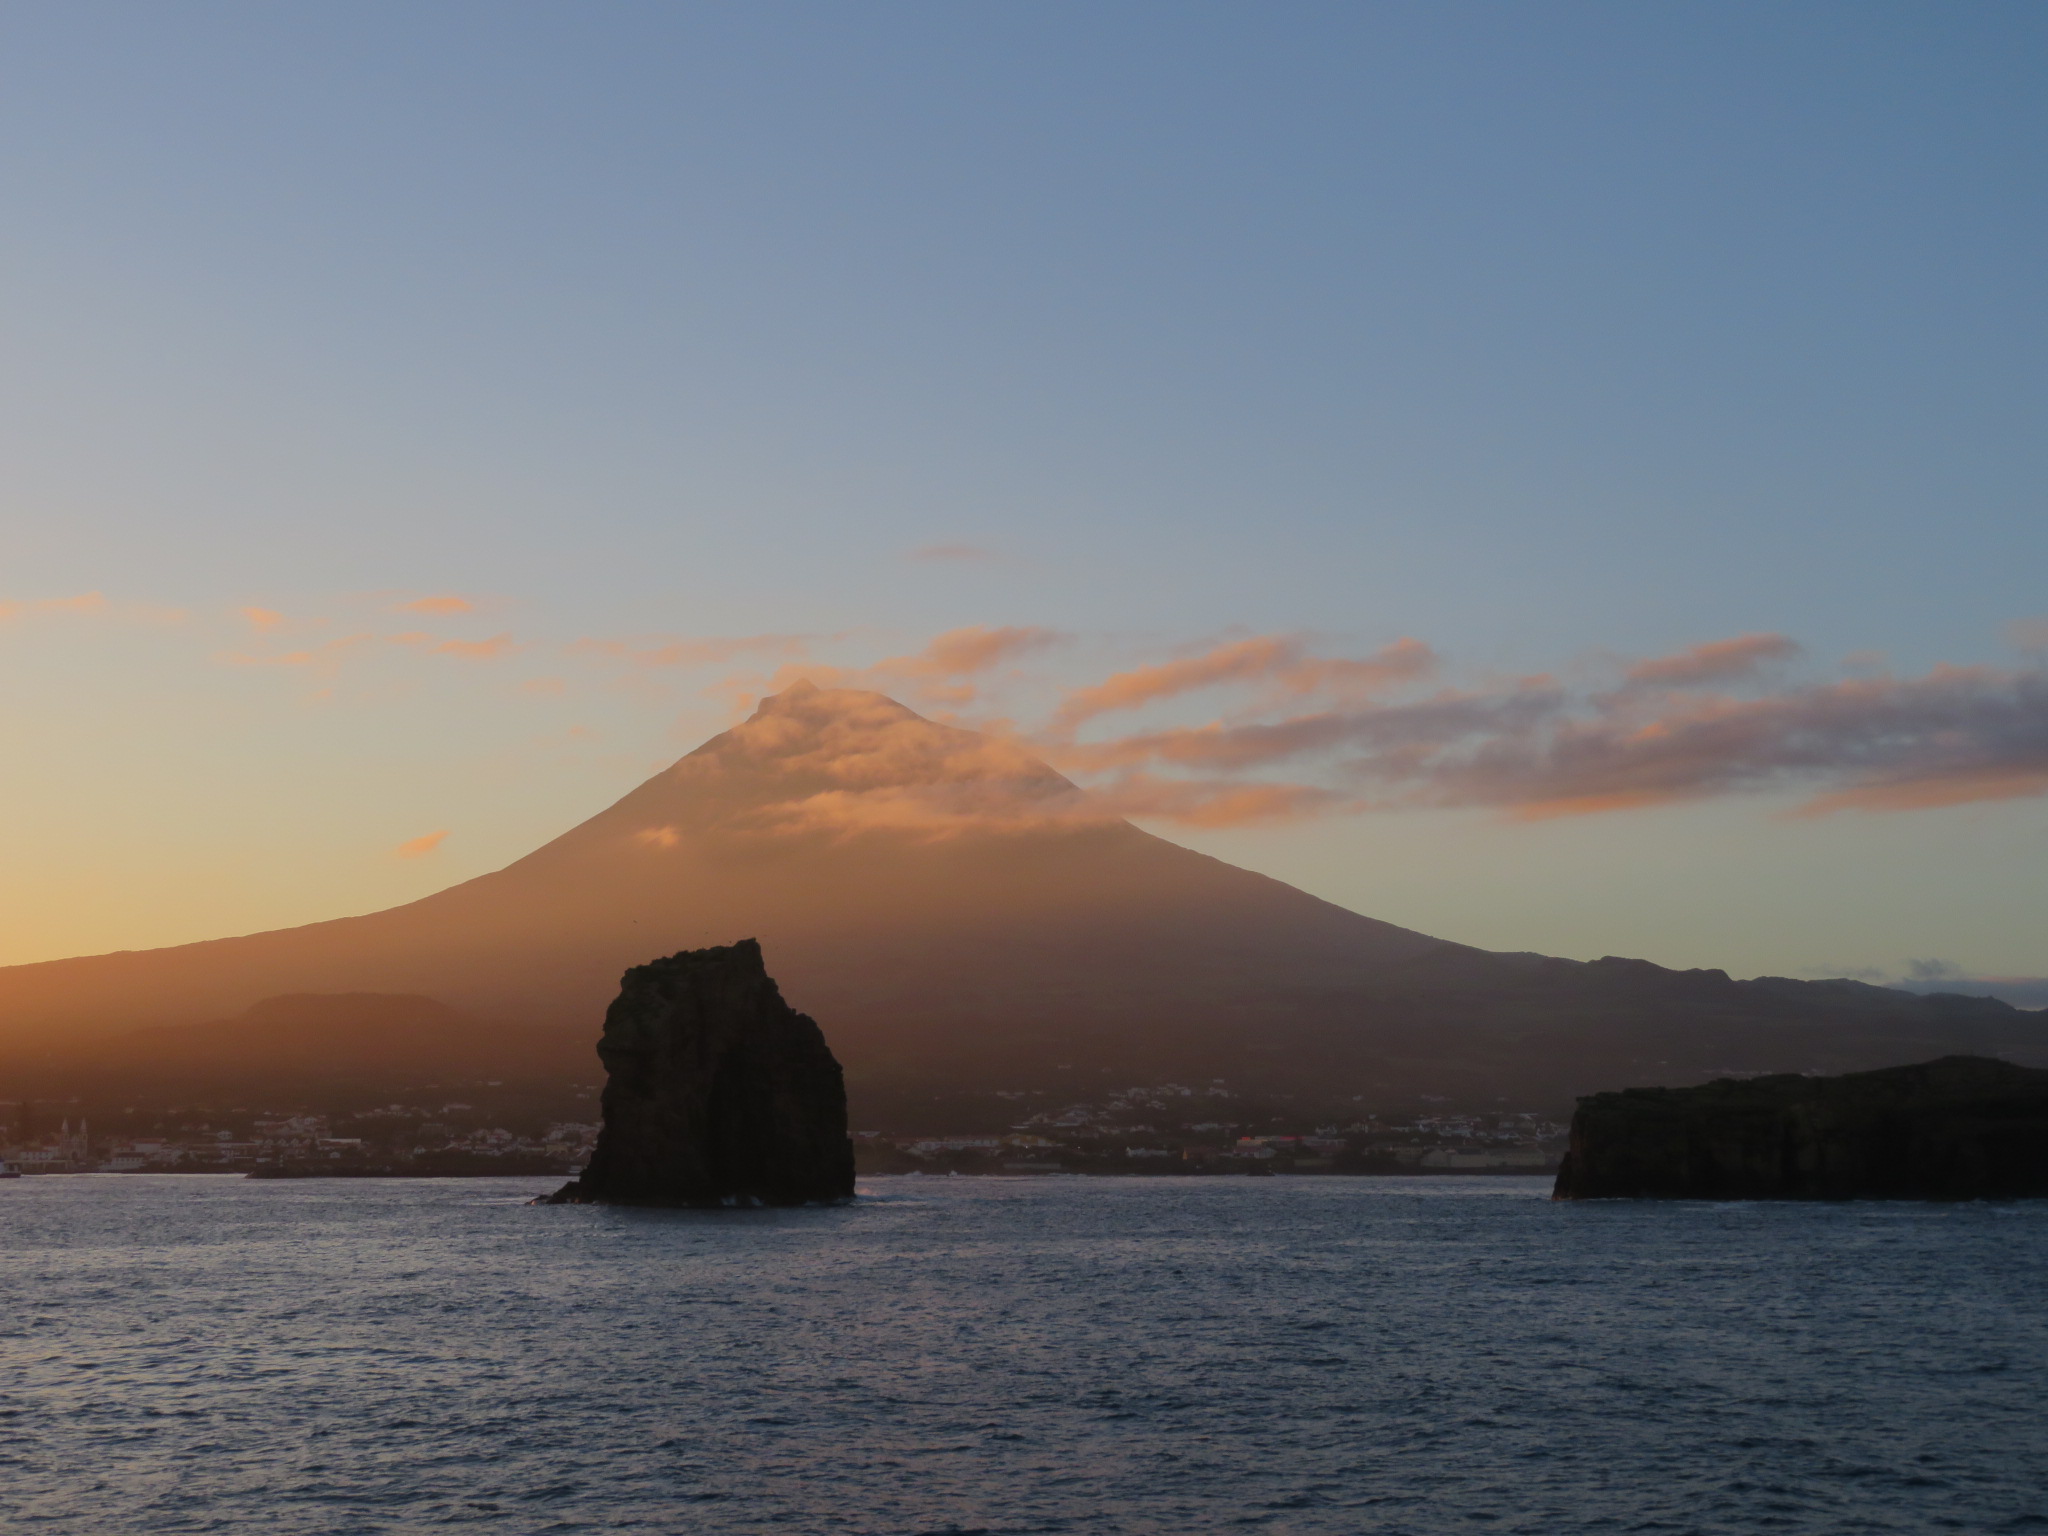 Portugal Azores, The Azores, Pico from off Madelena, Walkopedia